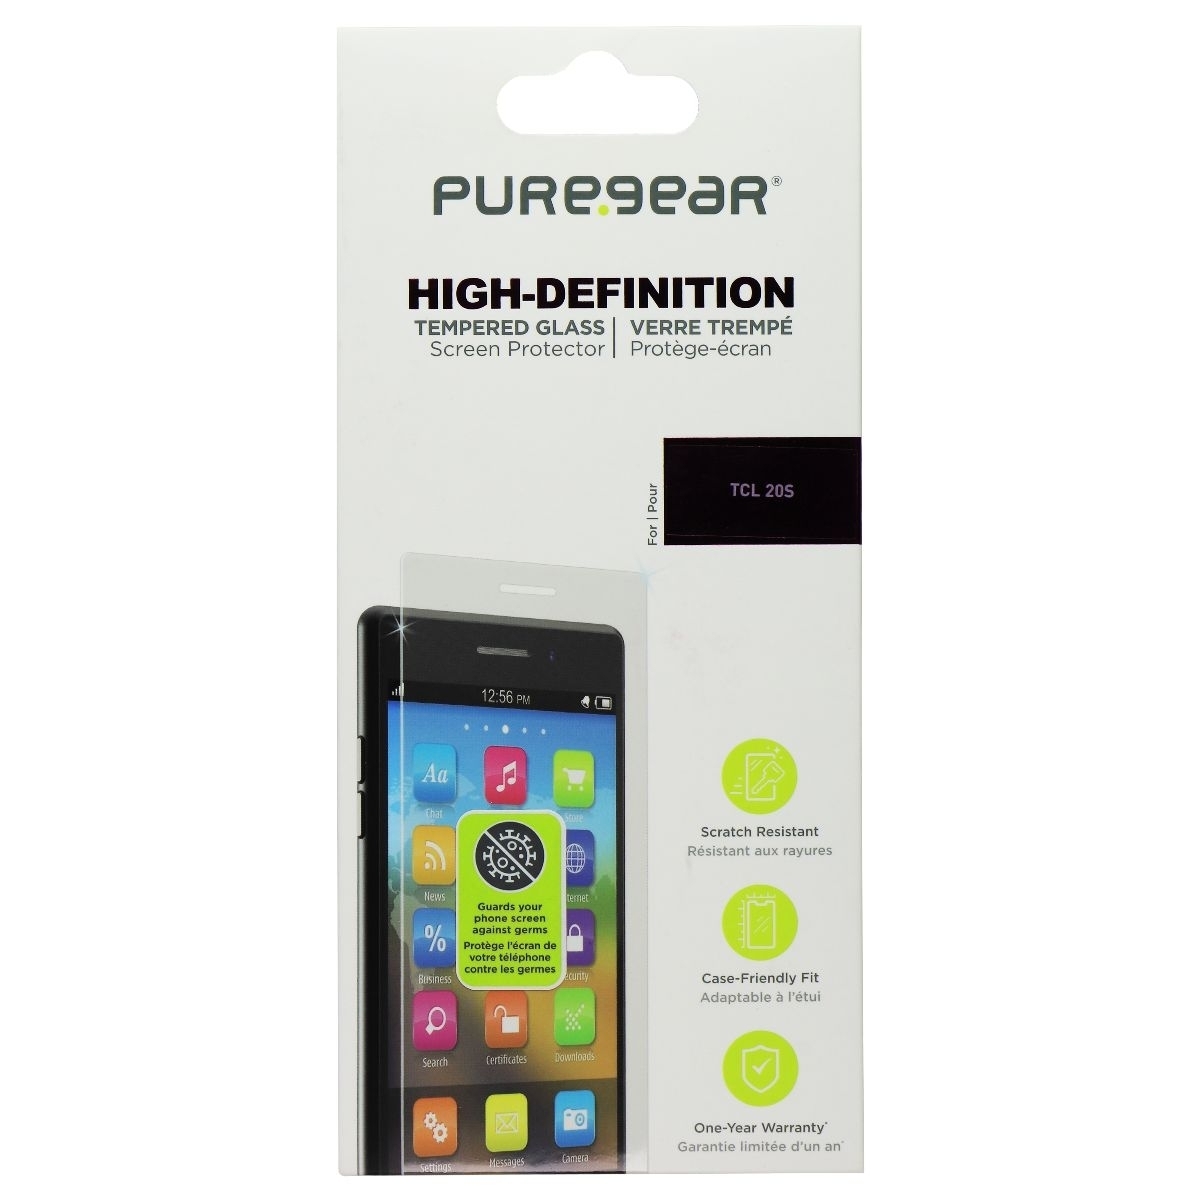 PureGear High-Definition Tempered Glass For TCL 20S (2021 Model) - Clear (Refurbished)